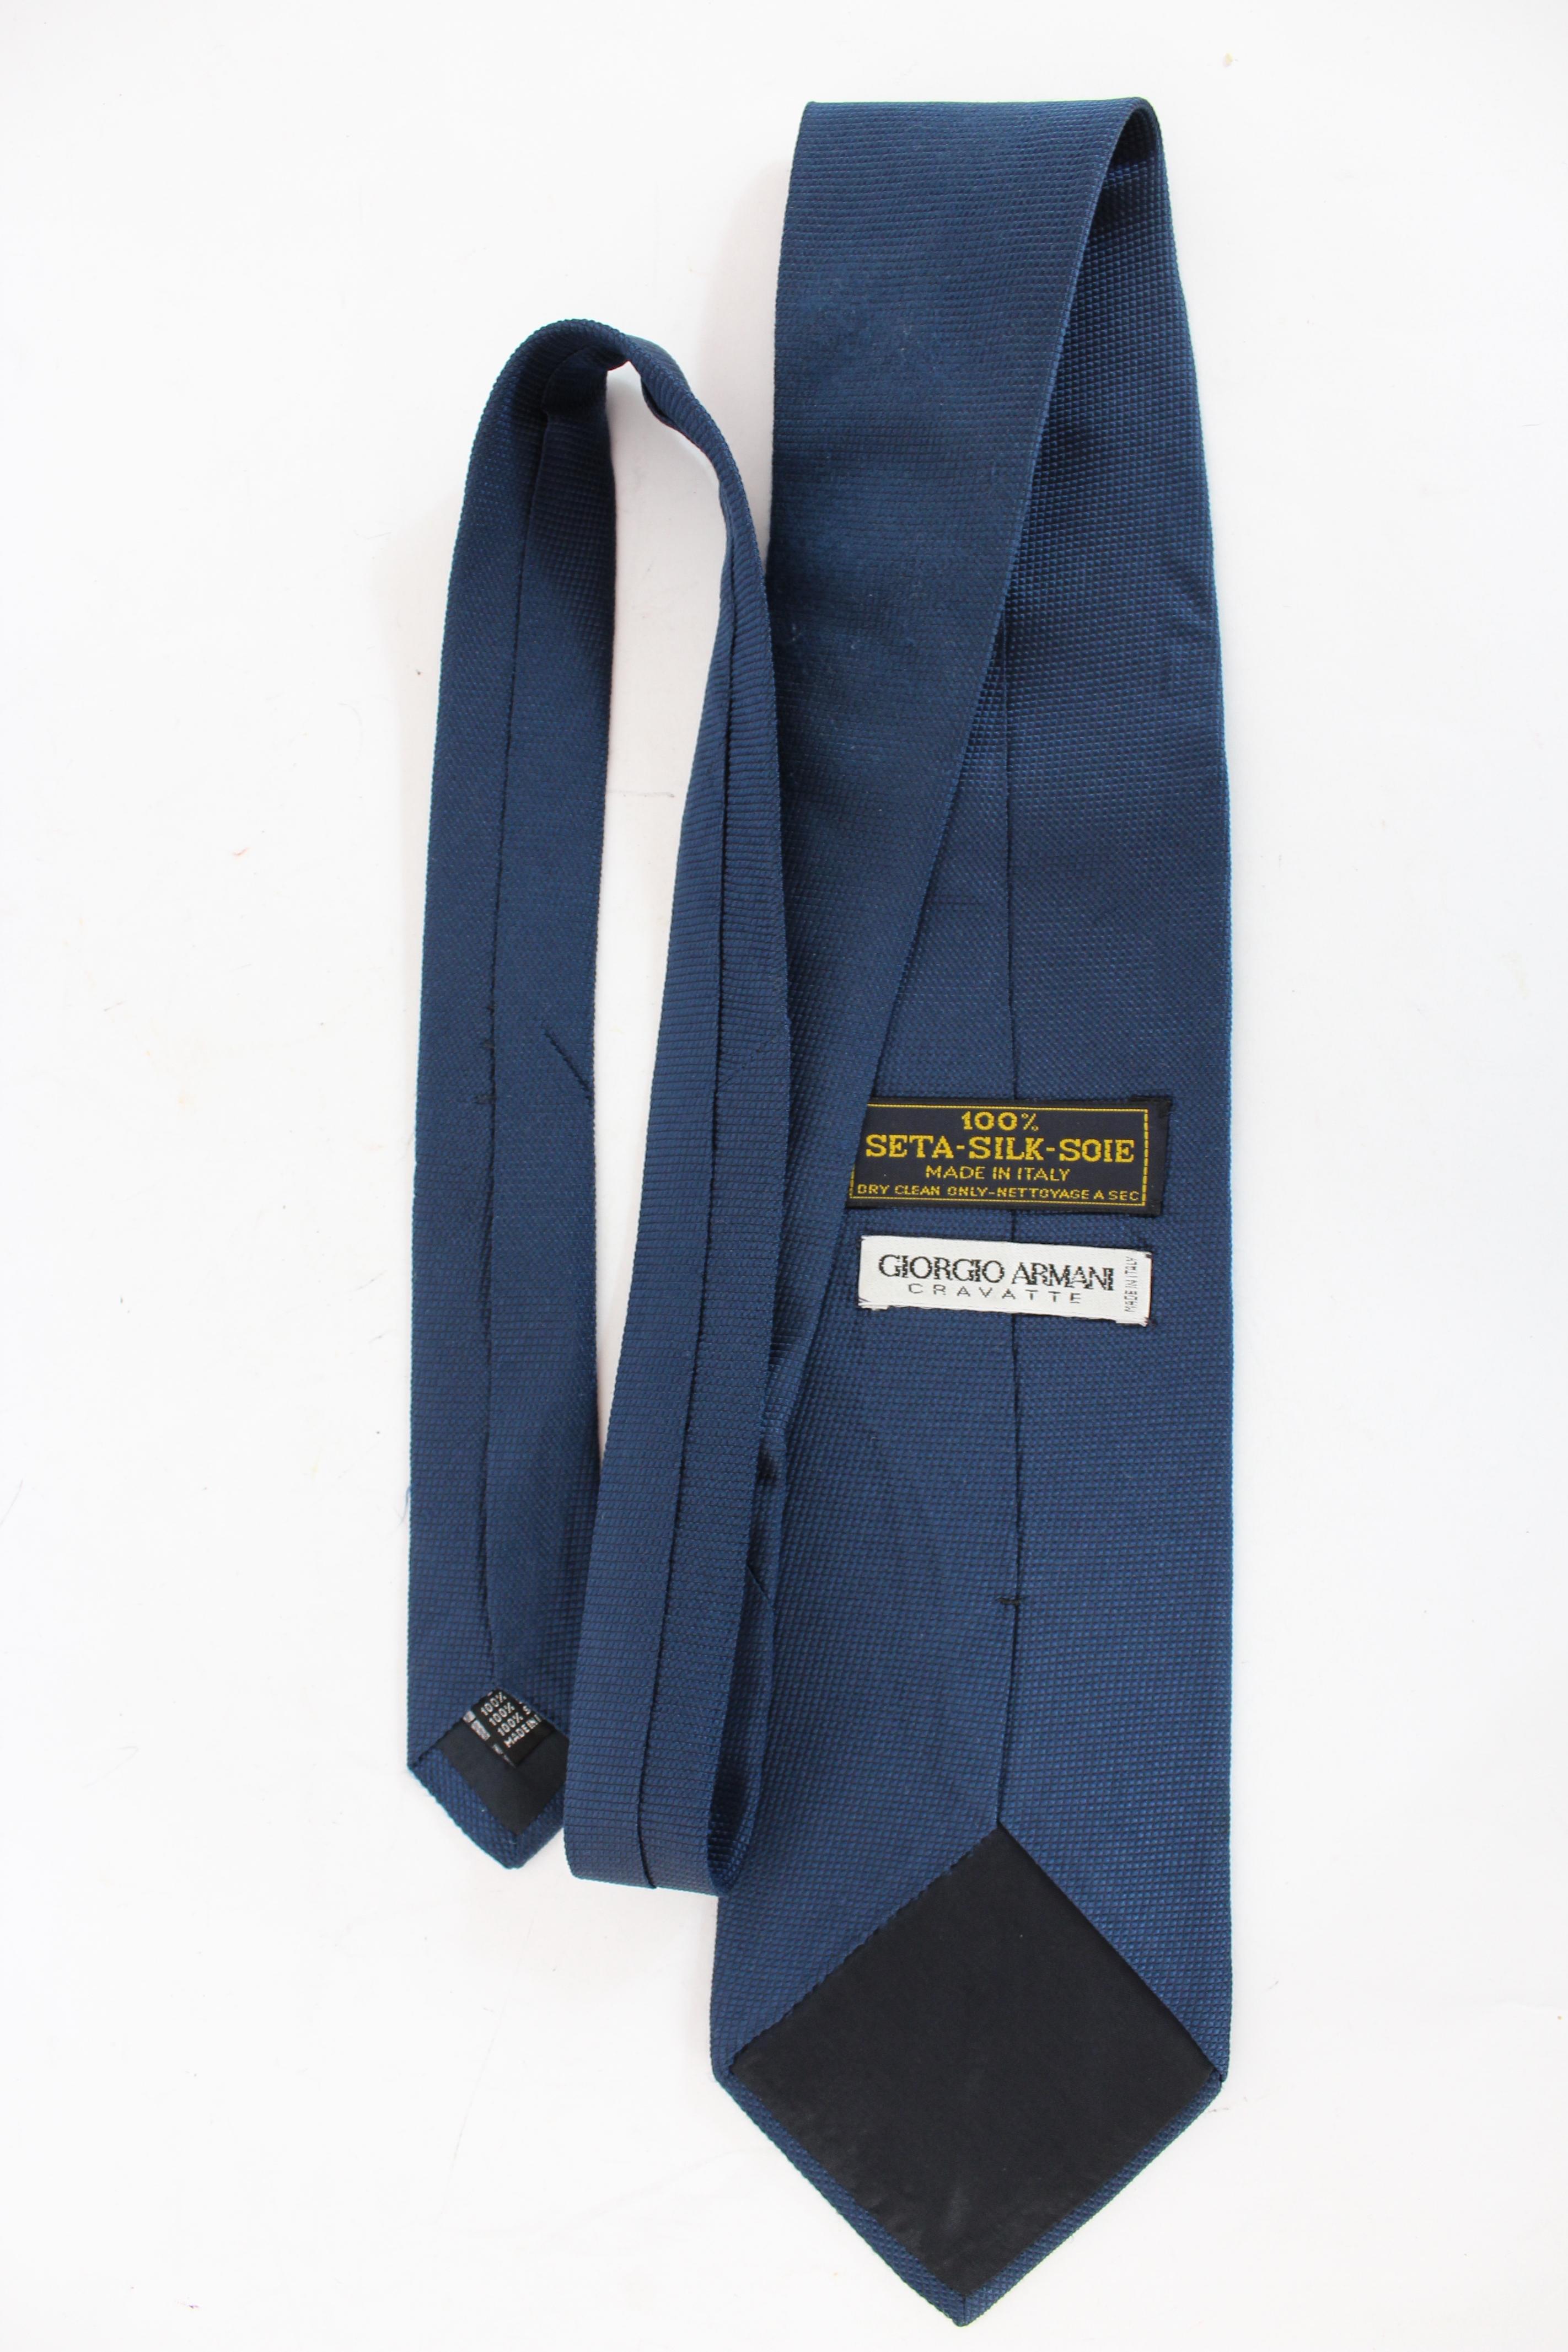 Giorgio Armani vintage tie 90s. Classic tie, blue color, 100% silk fabric. Made in Italy.

Condition: Excellent

Item used few times, it remains in its excellent condition. There are no visible signs of wear, and it is almost as good as